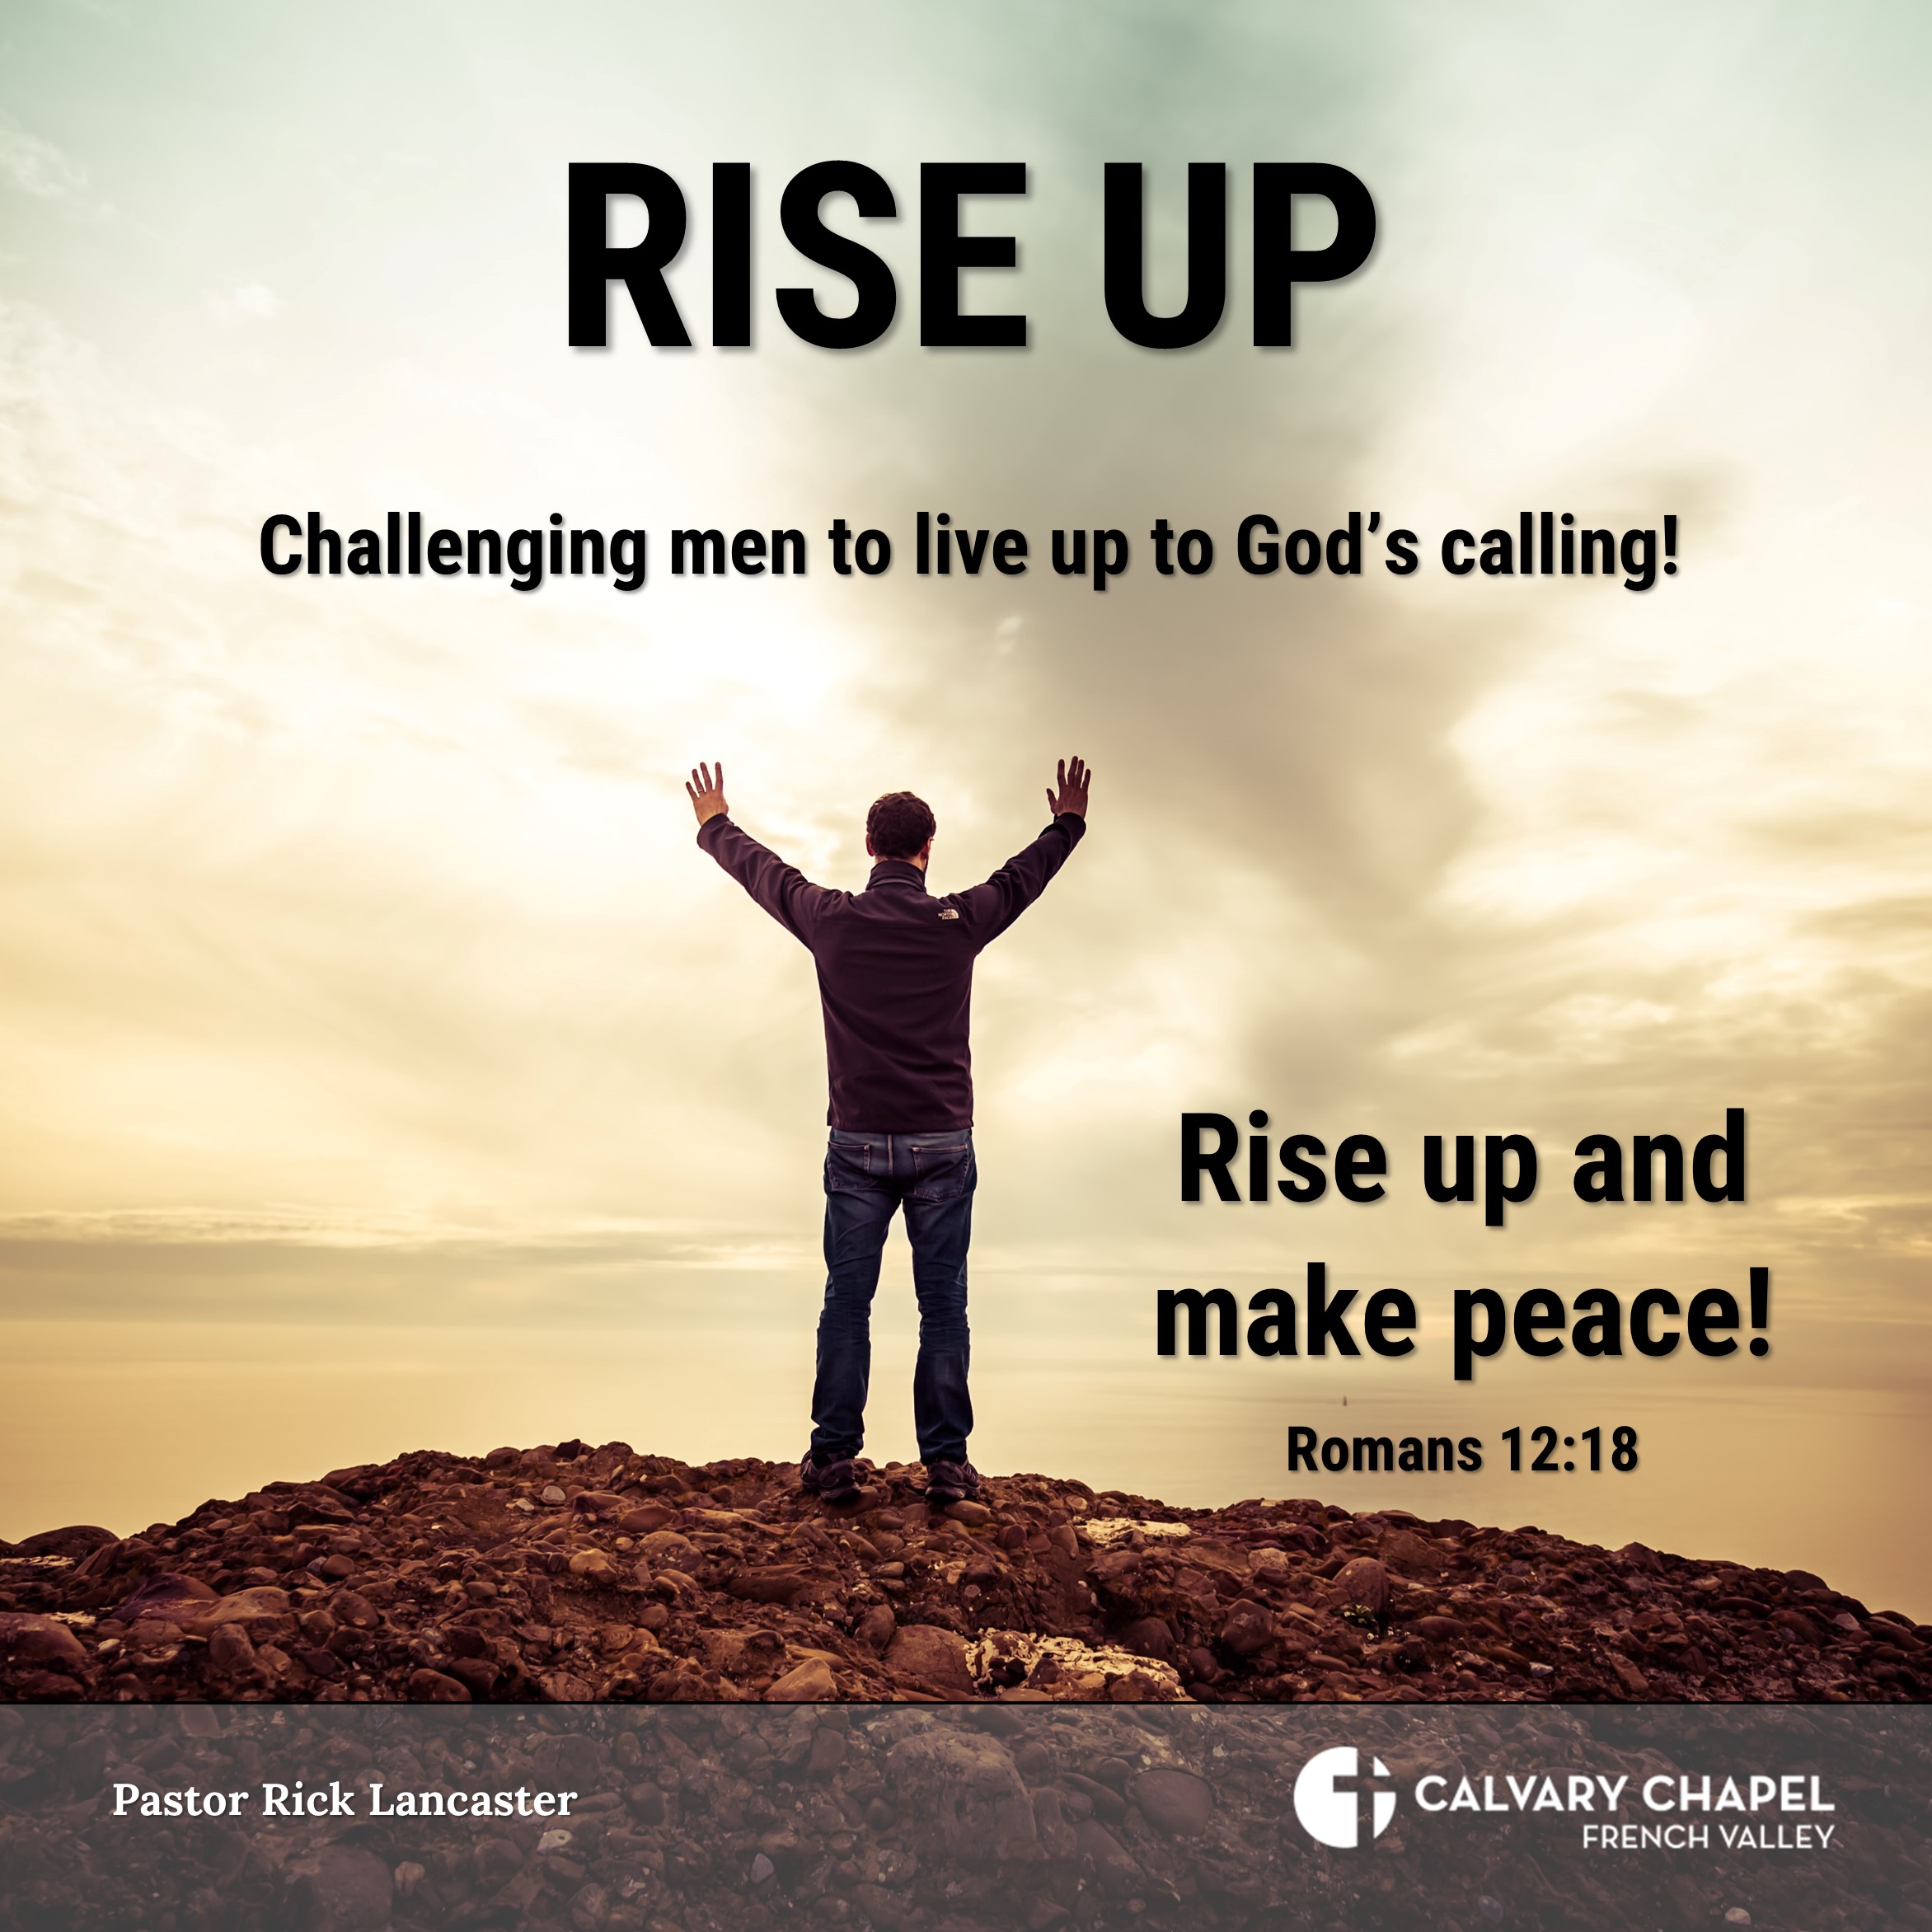 Rise up and make peace! Romans 12:18 - Men’s Breakfast – December 16, 2023 - RISE UP: Challenging men to live up to God’s calling!